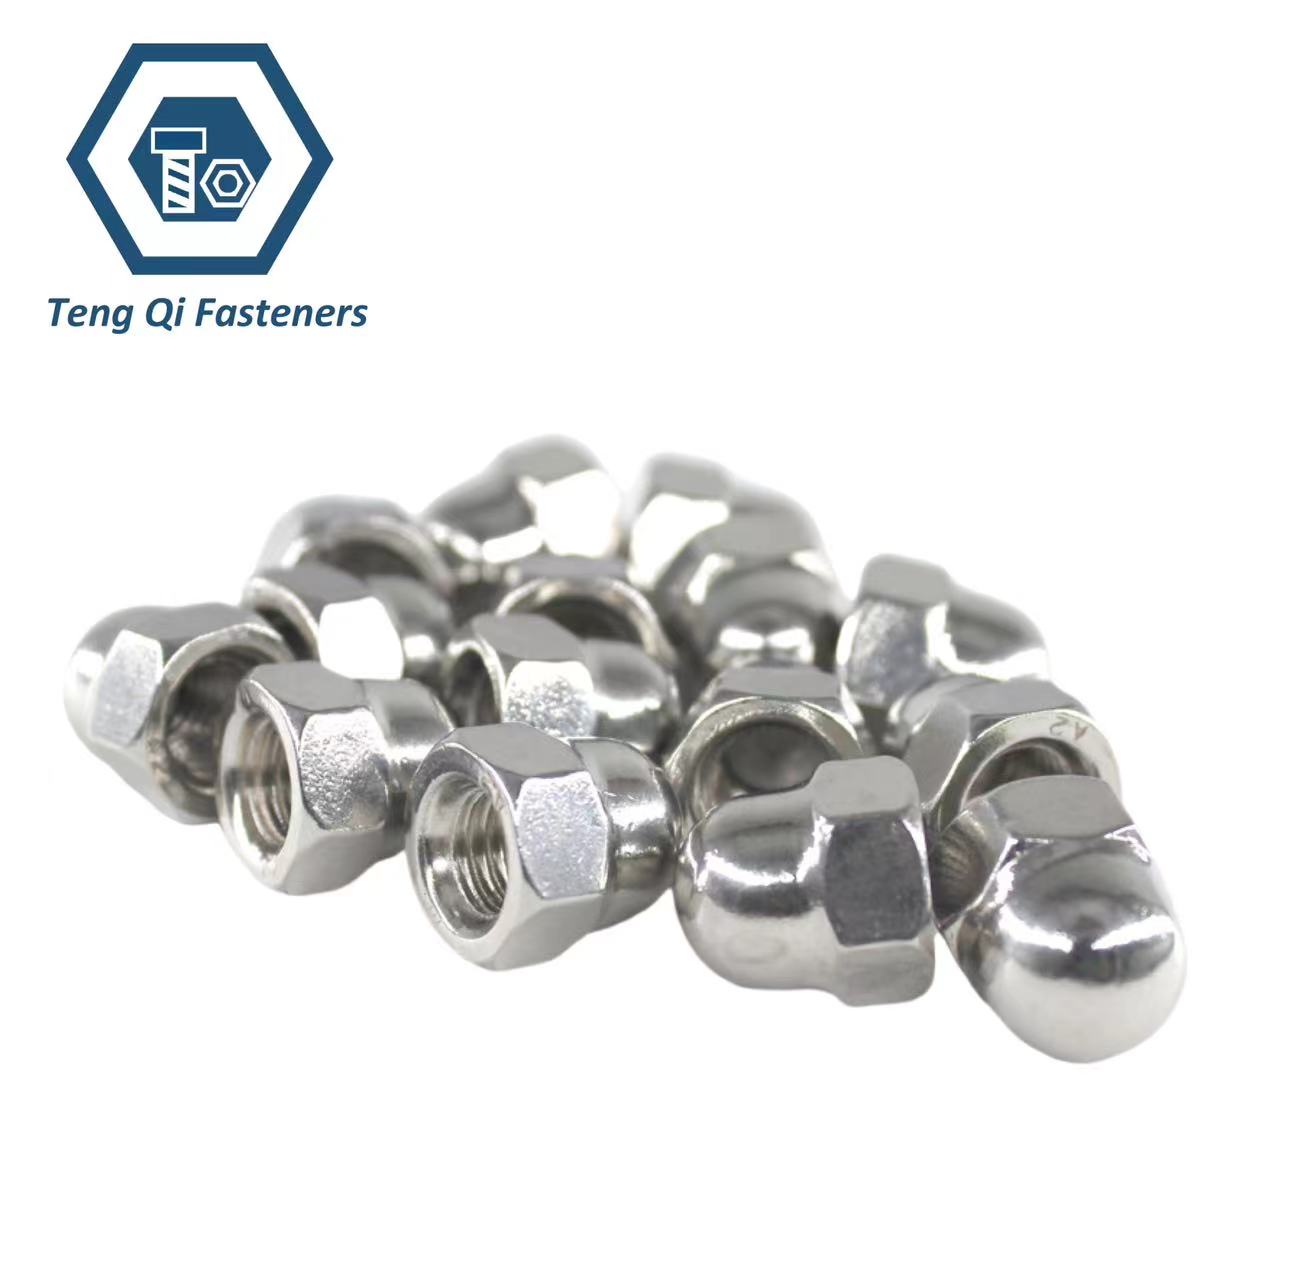 Stainless Steel DIN1587 Domed Cap Nut Manufacturer In China